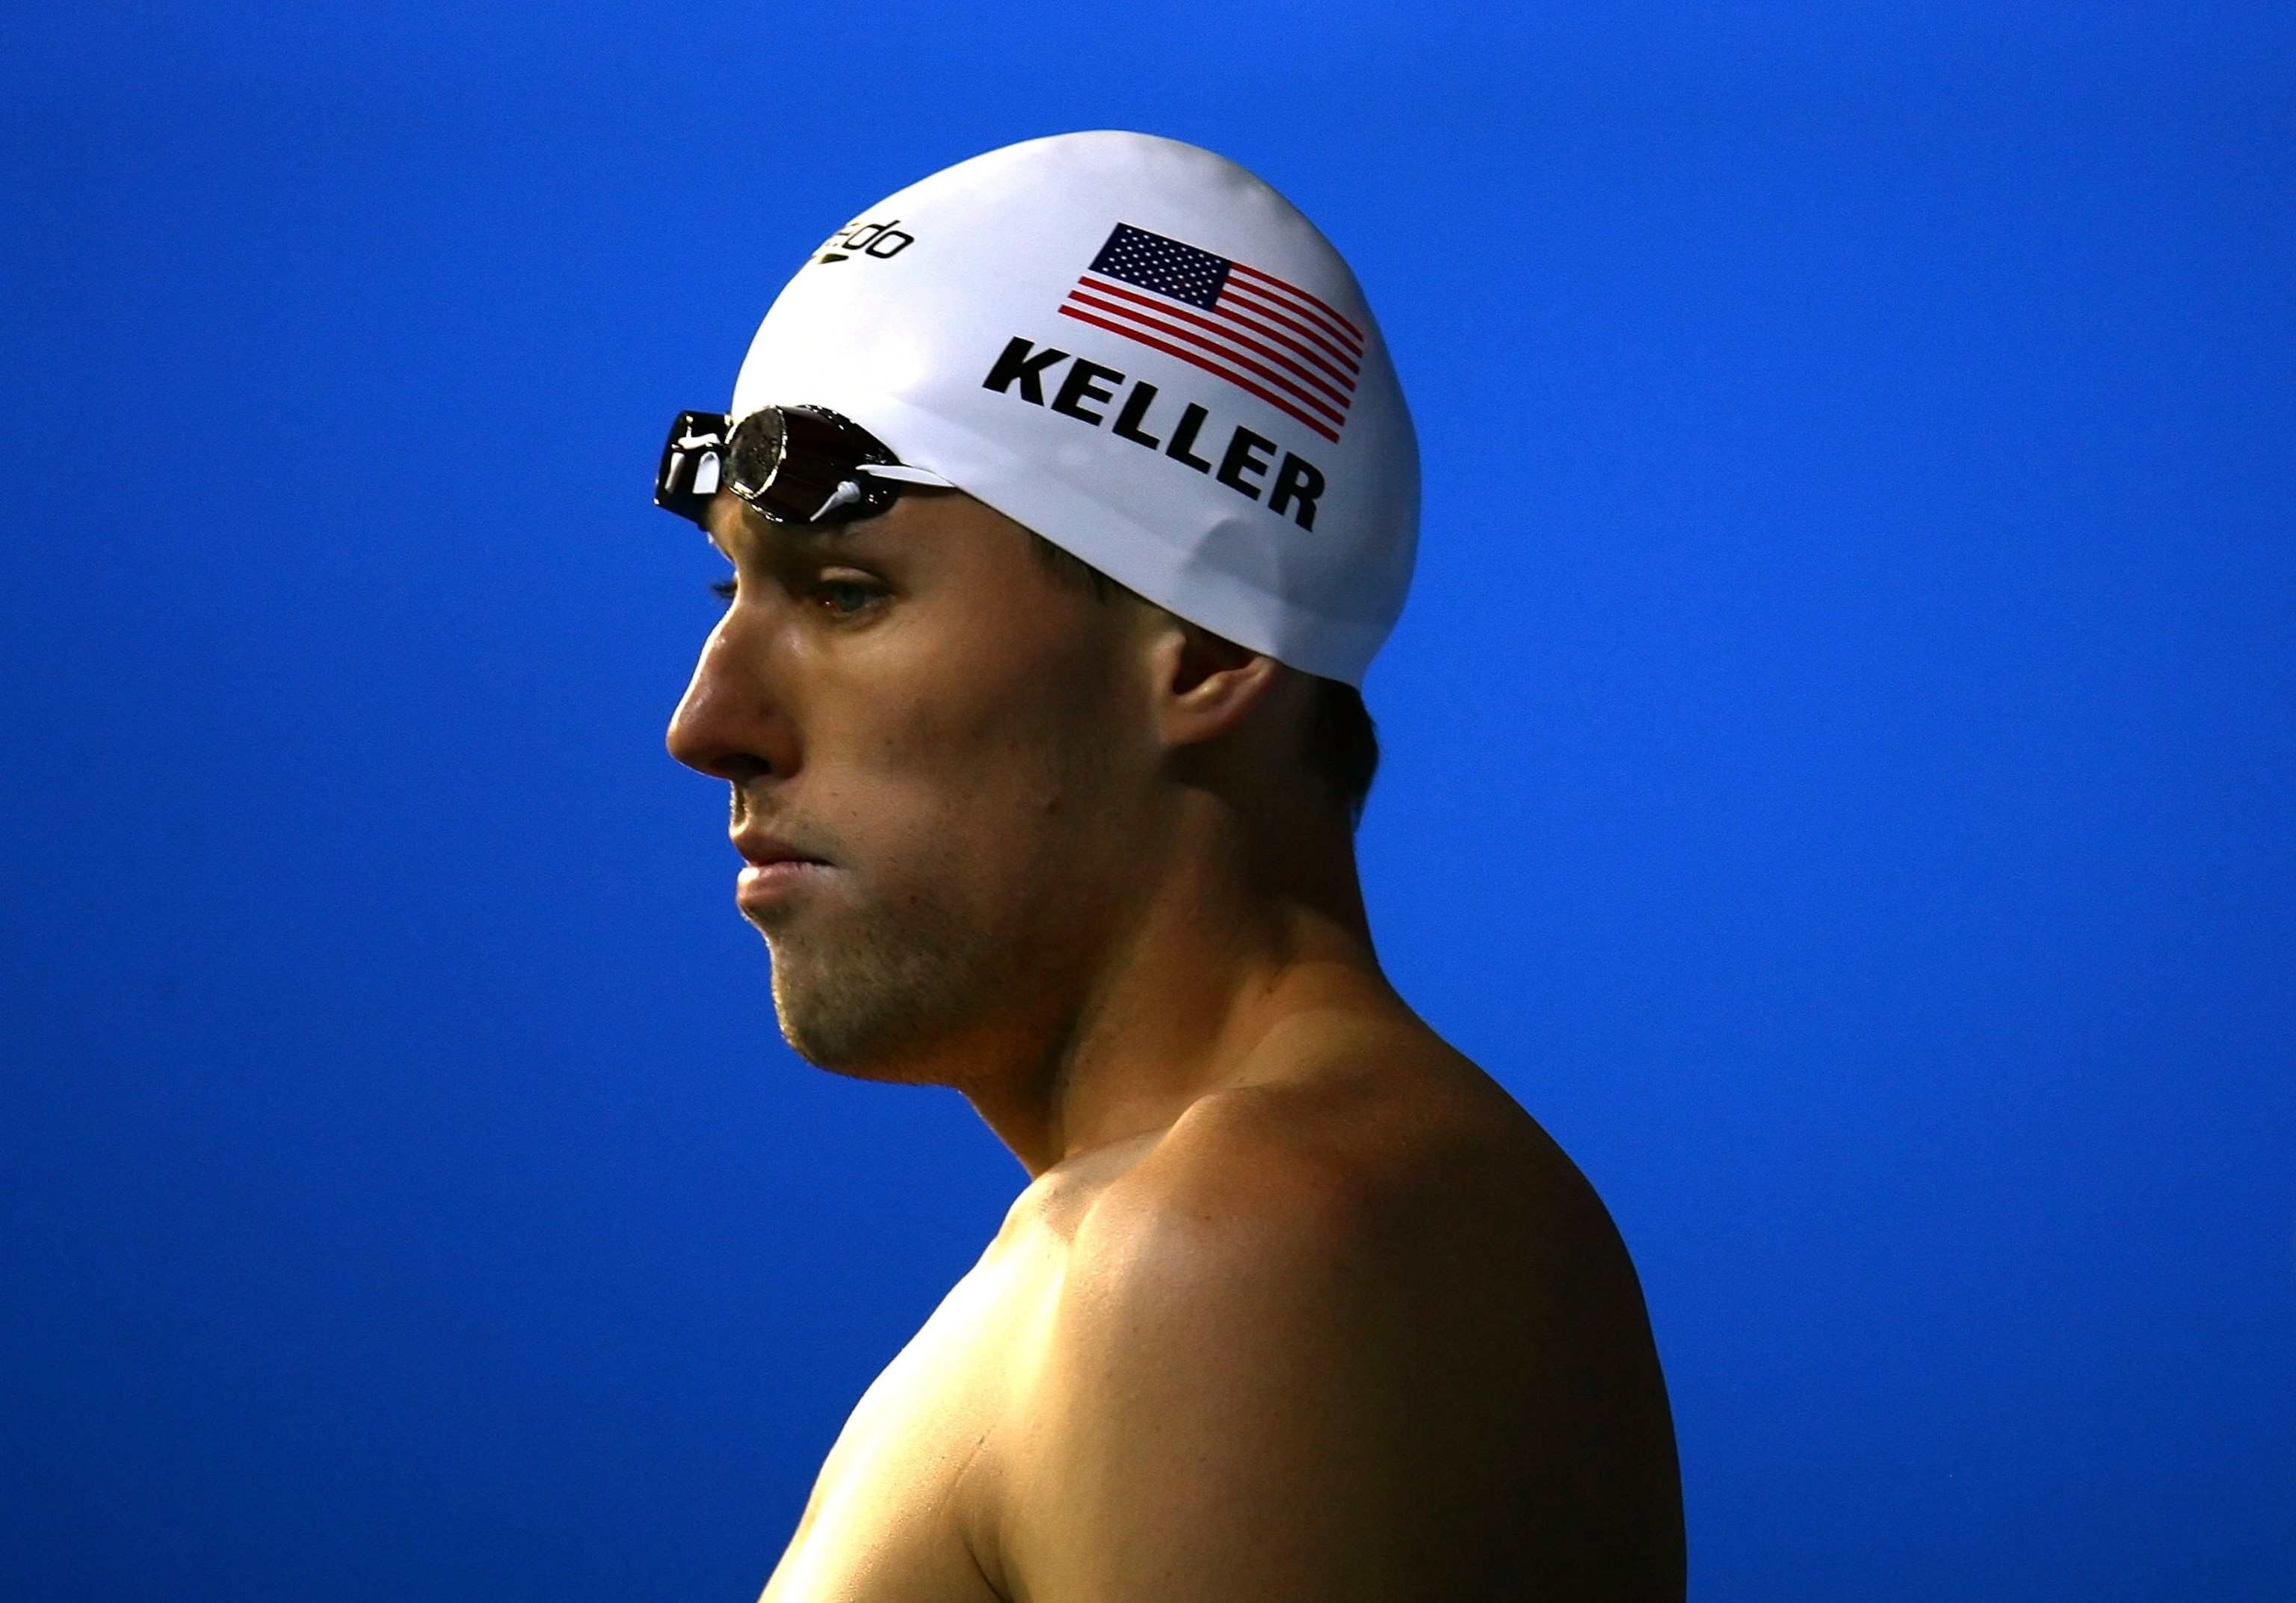 PHOTO: In this March 26, 2007, file photo, Klete Keller is shown after finishing second in the Men's 200m Freestyle heats during the XII FINA World Championships in Melbourne, Australia. 